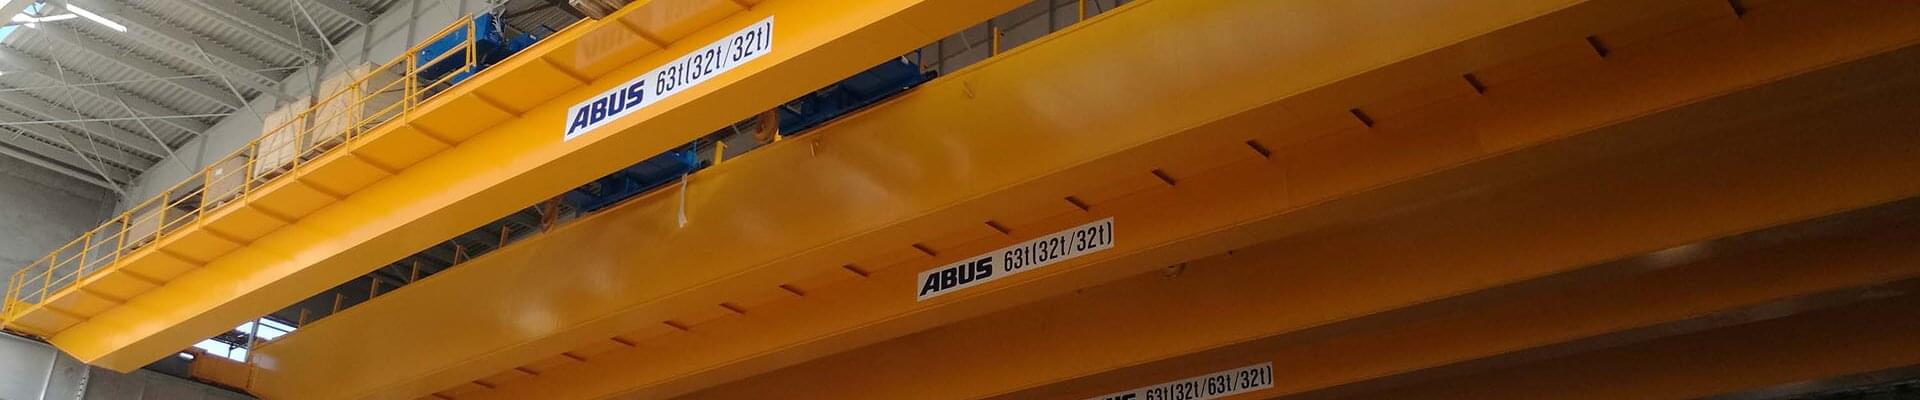 ABUS travelling cranes in paper and packaging production plant